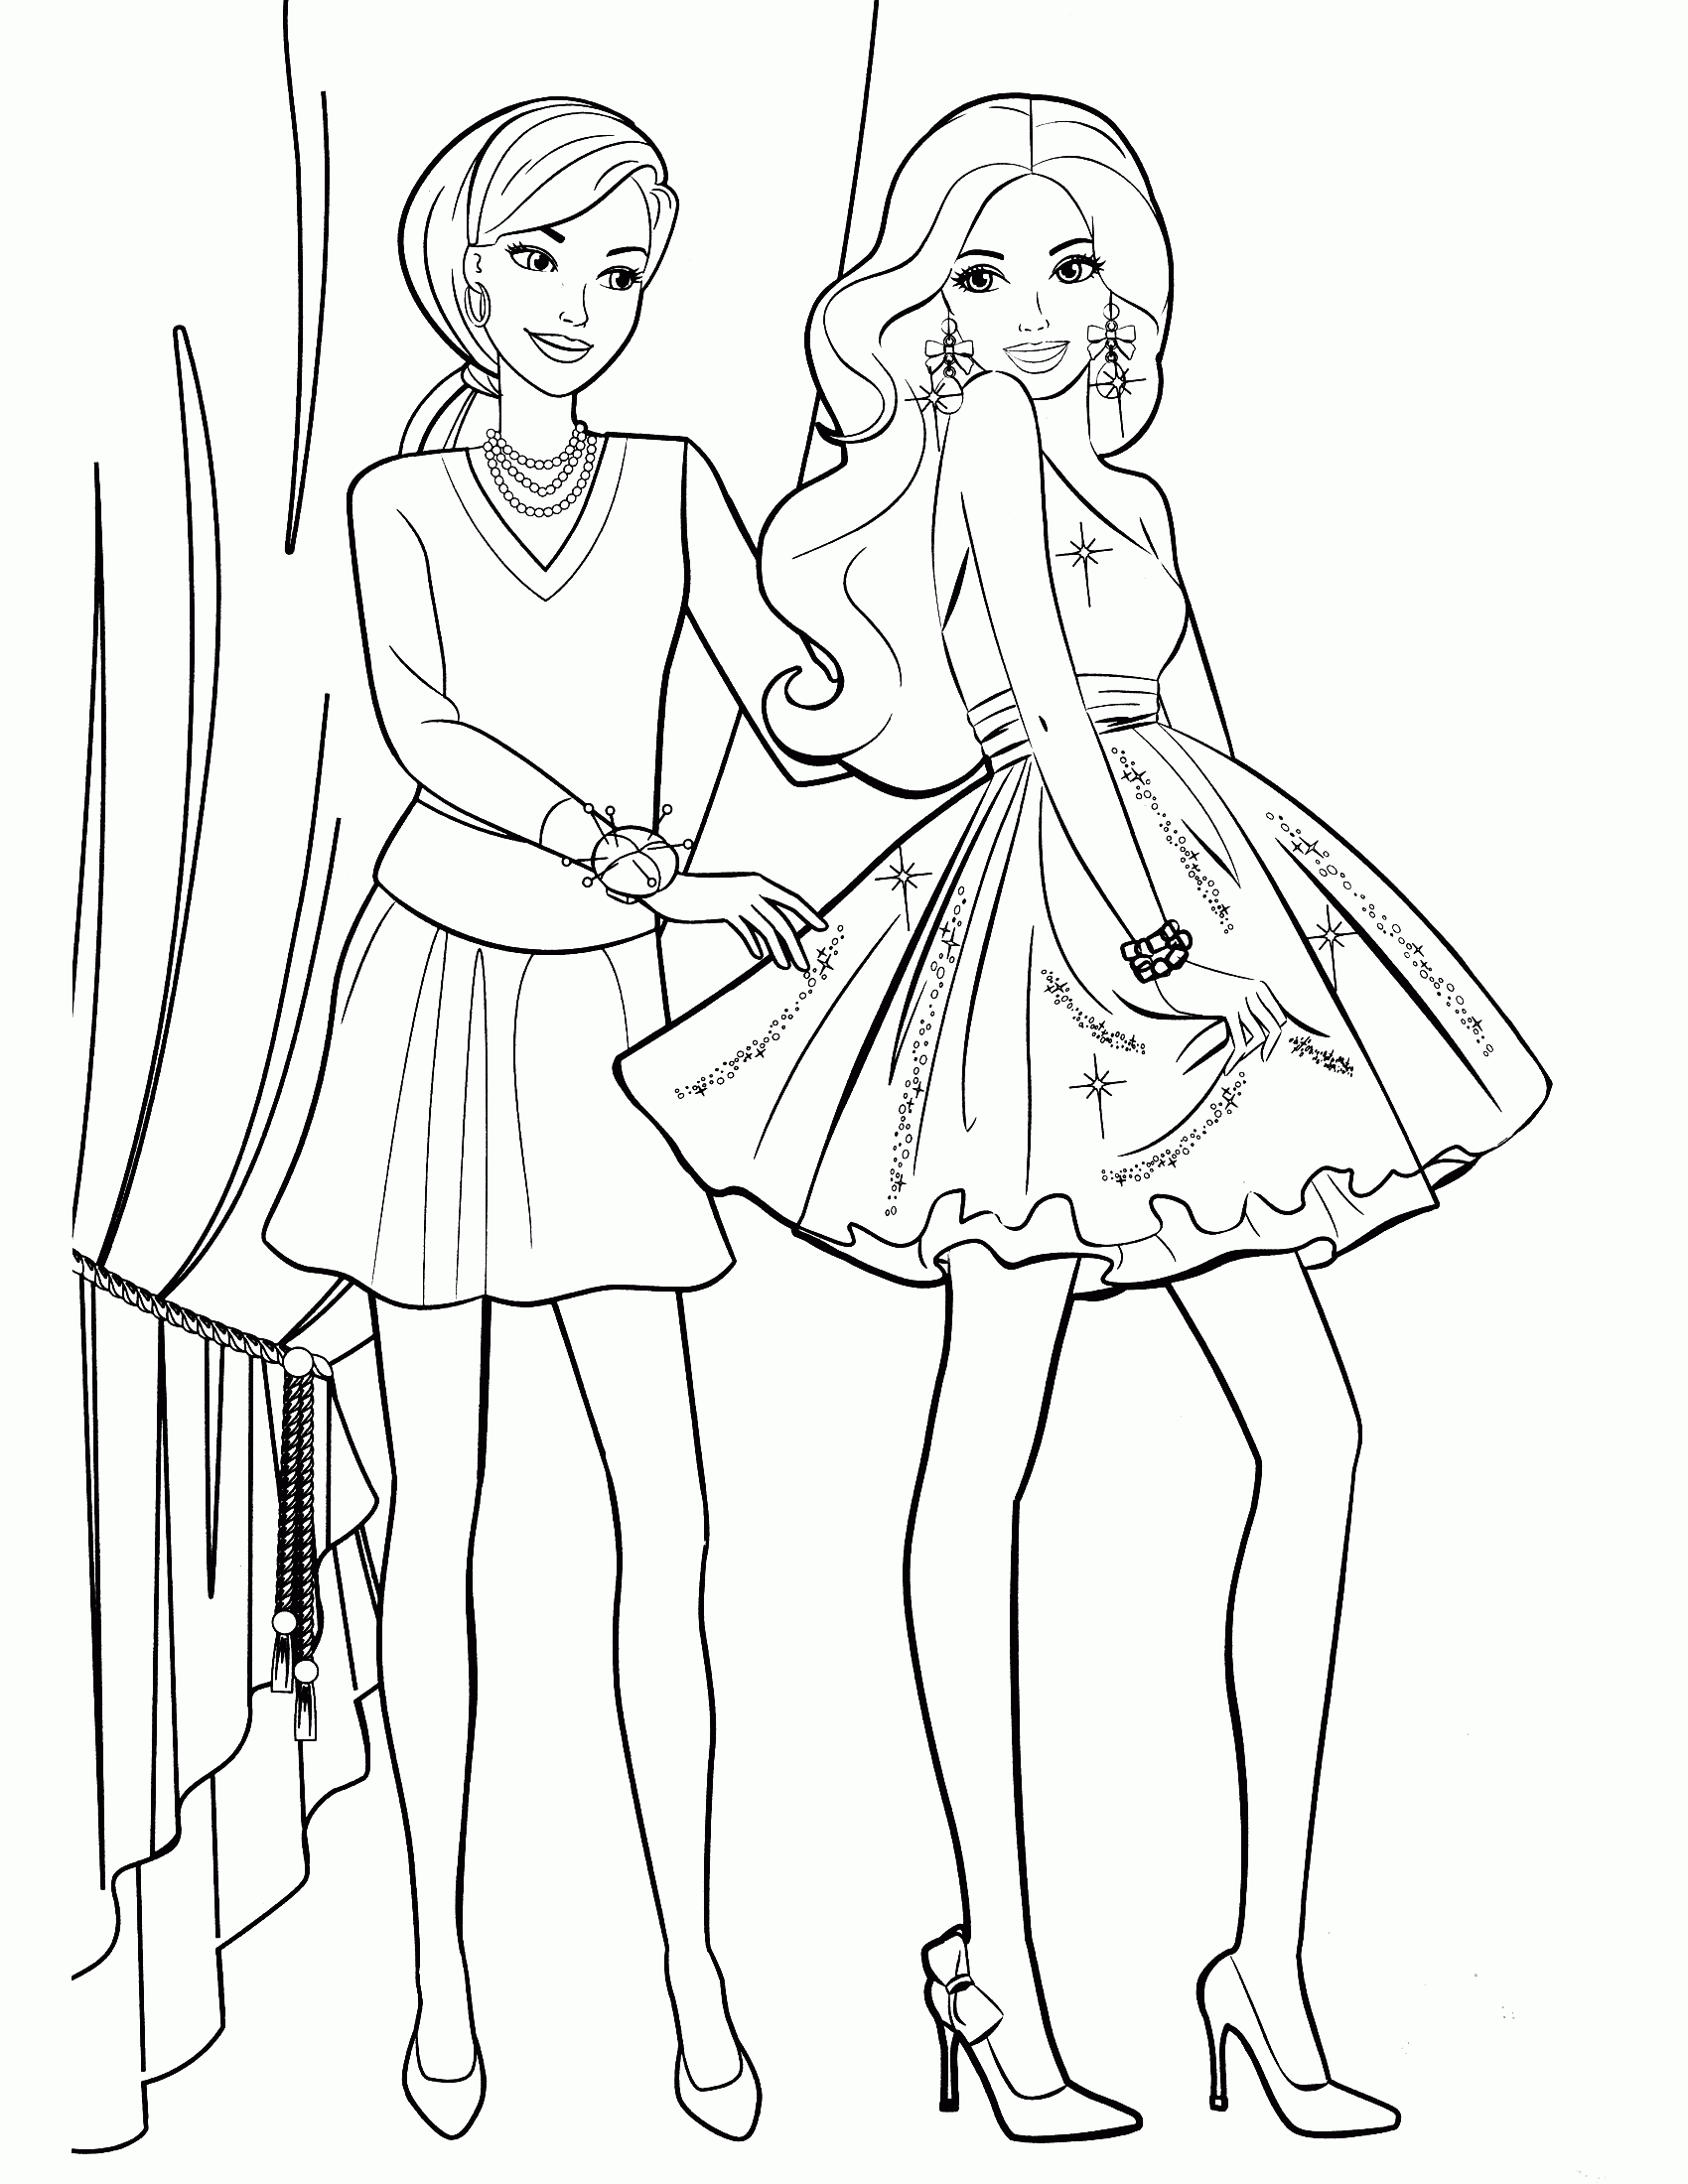 Barbie Gymnastic Coloring Pages For Girls - Coloring Pages For All